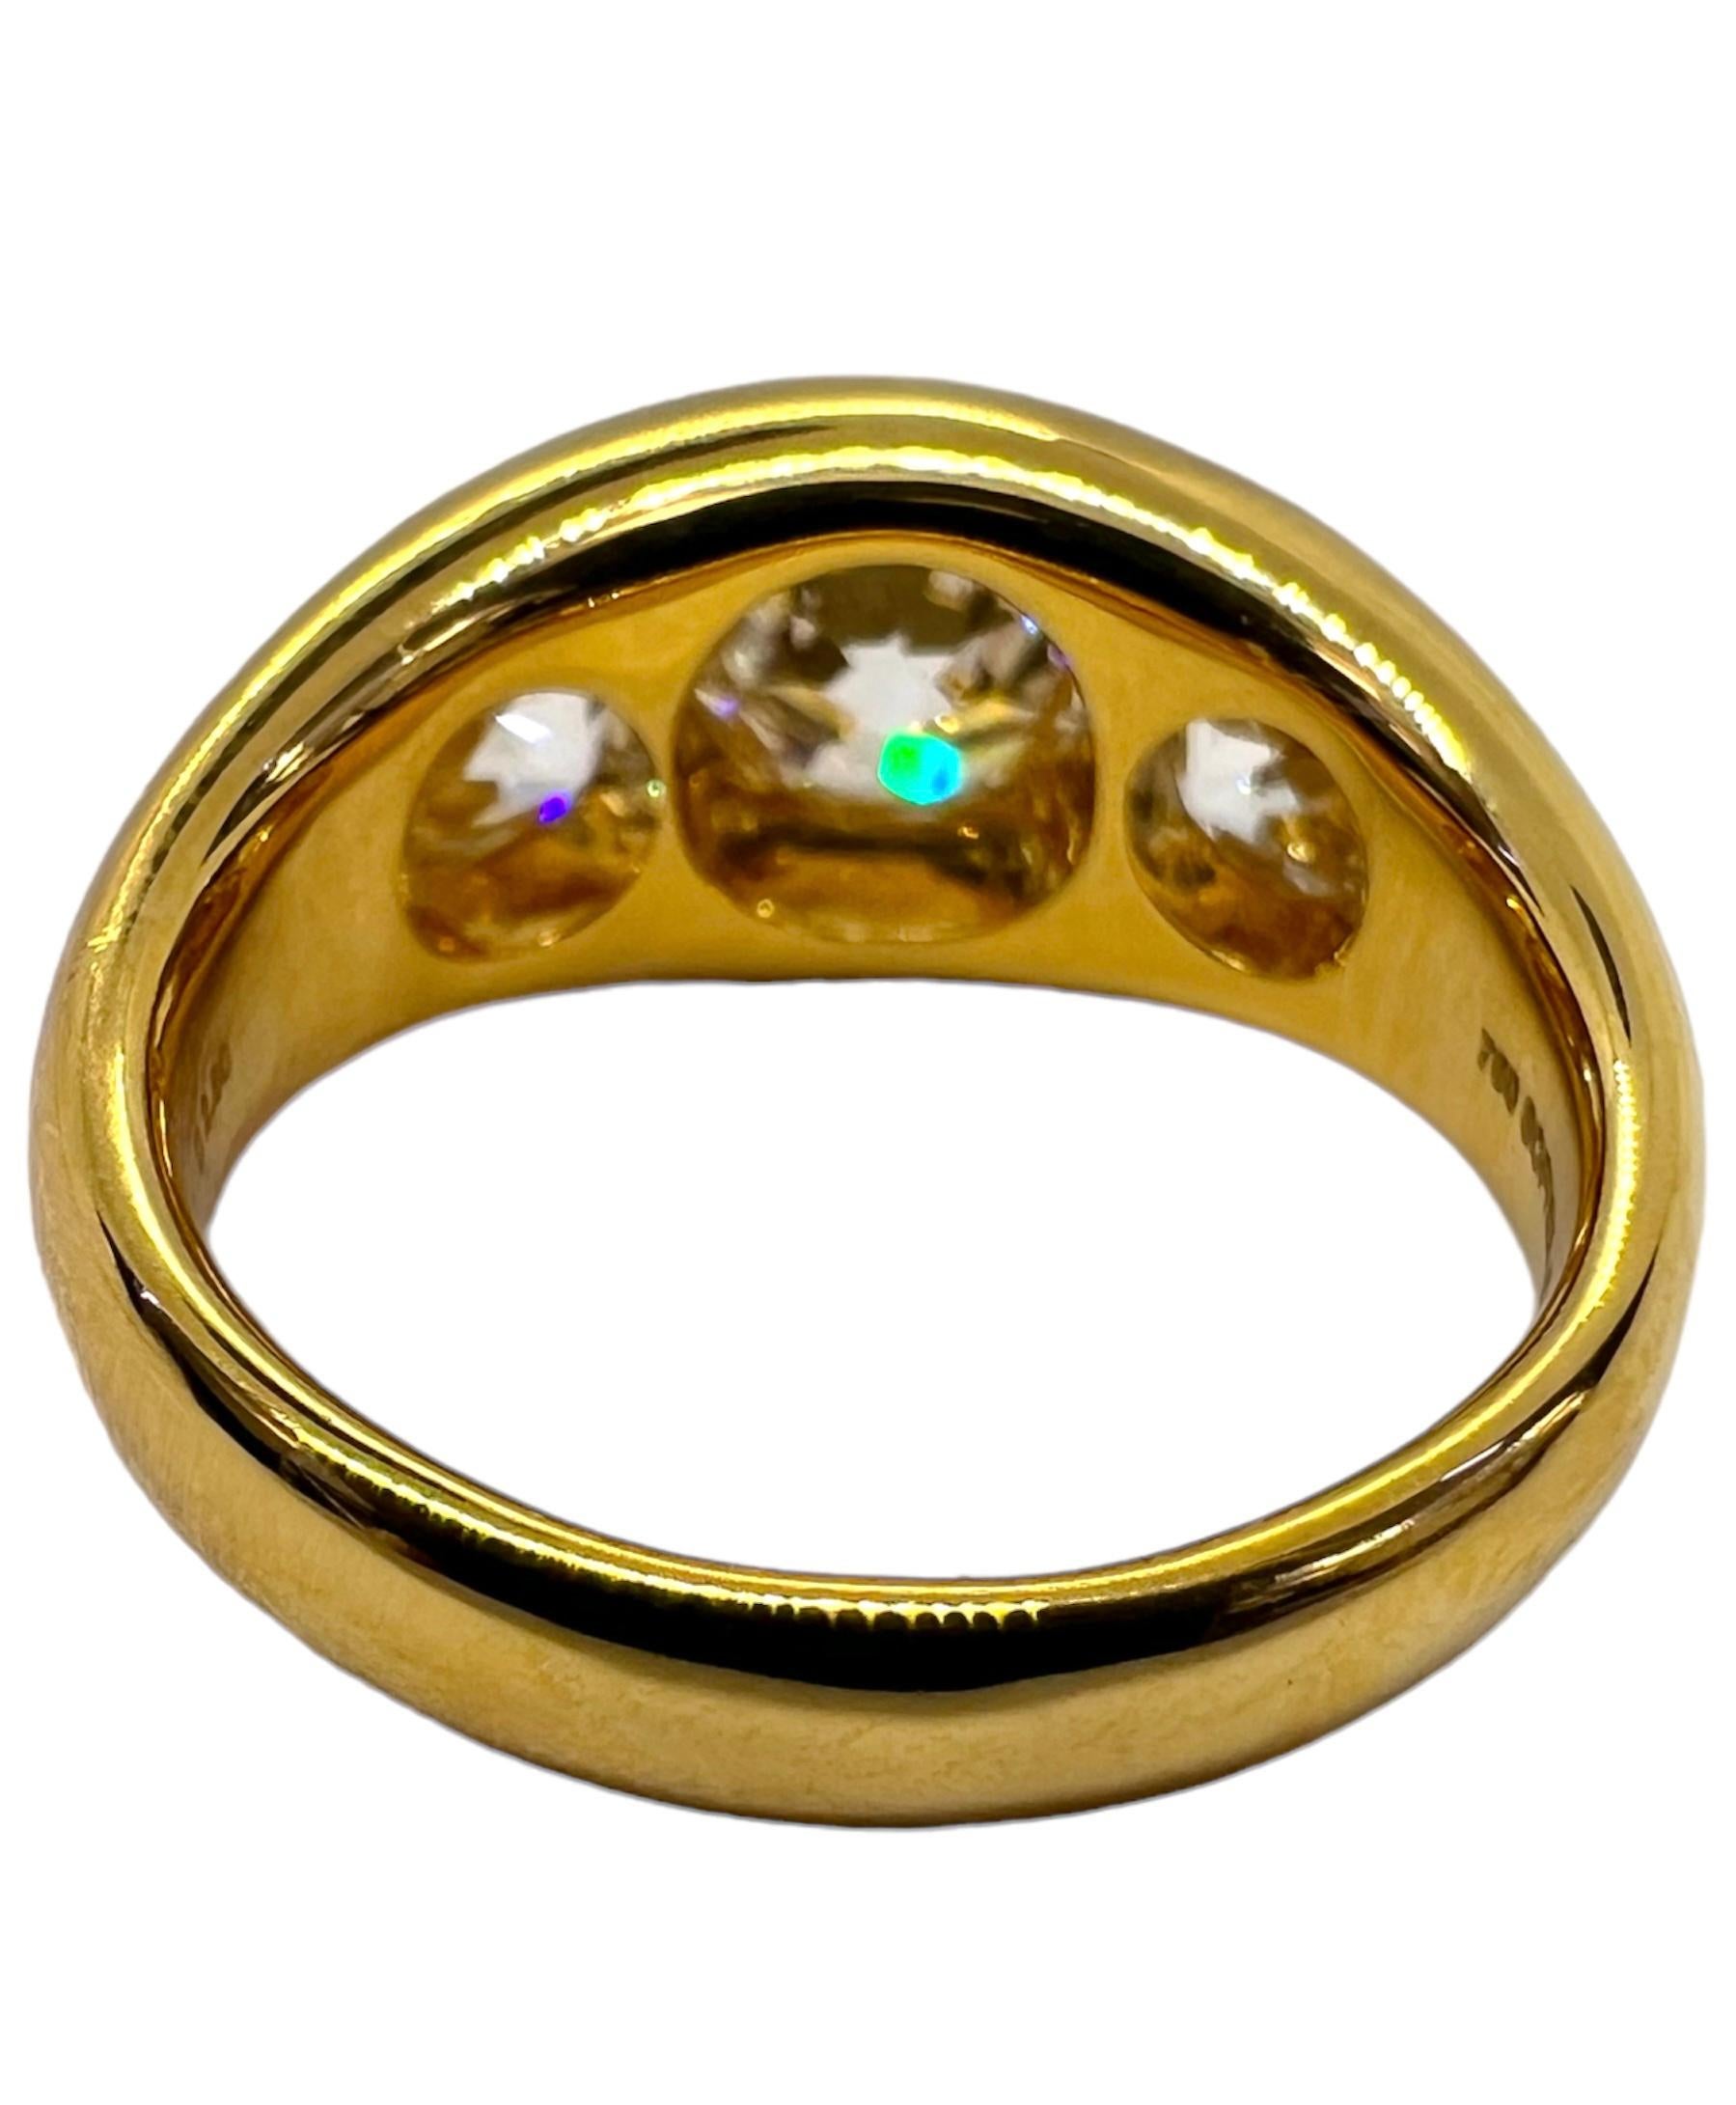 Sophia D. 1.30 Carat Diamond Ring in 18K Yellow Gold In New Condition For Sale In New York, NY